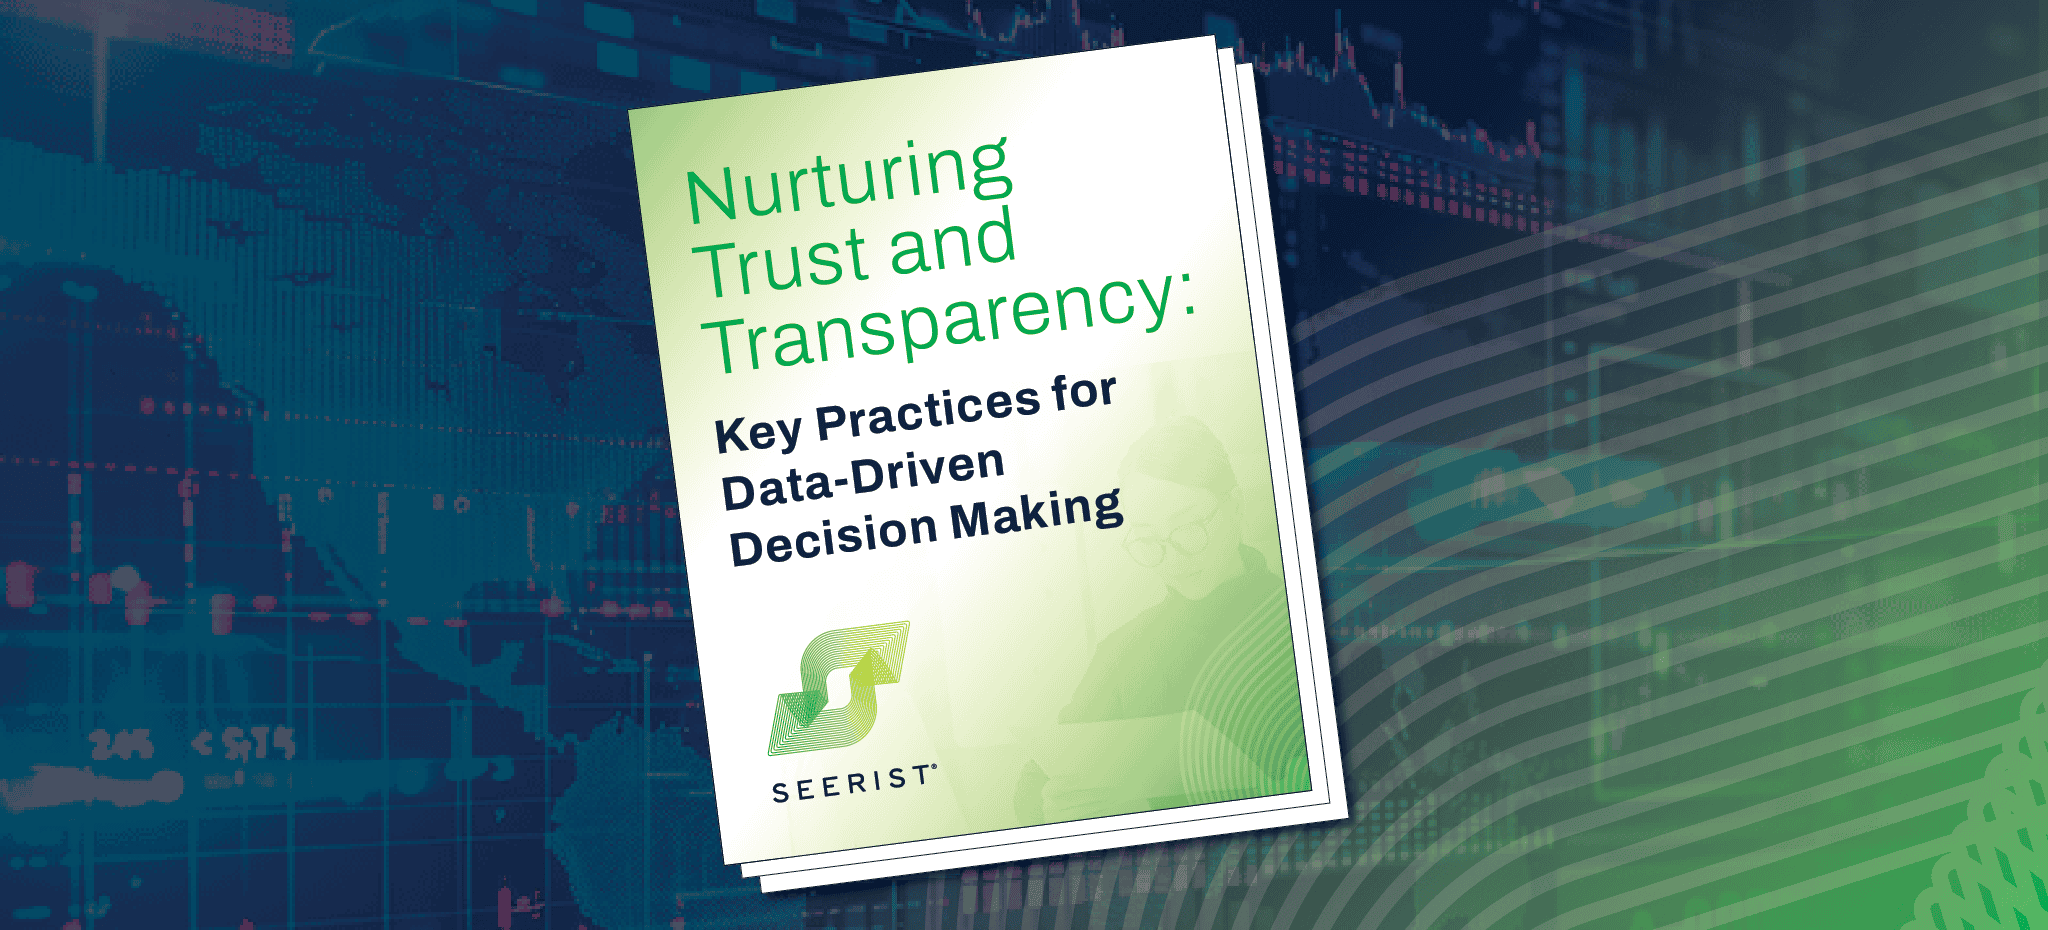 Nurturing Trust and Transparency: Key Practices for Data-Driven Decision Making